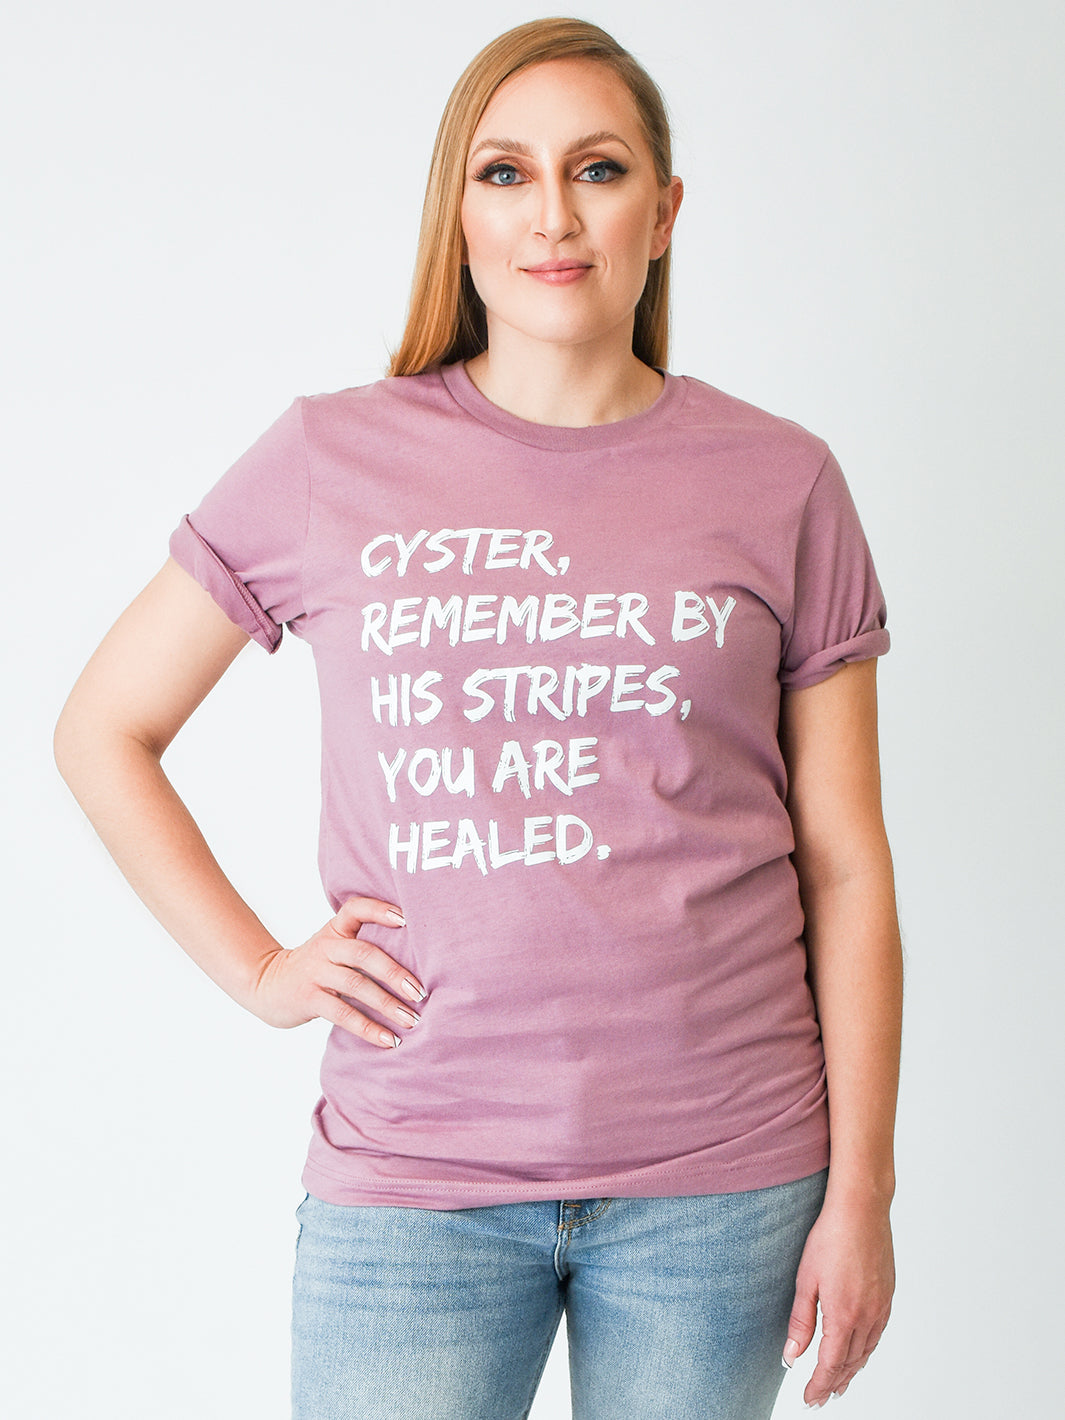 Cyster, Remember By His Stripes, You Are Healed.